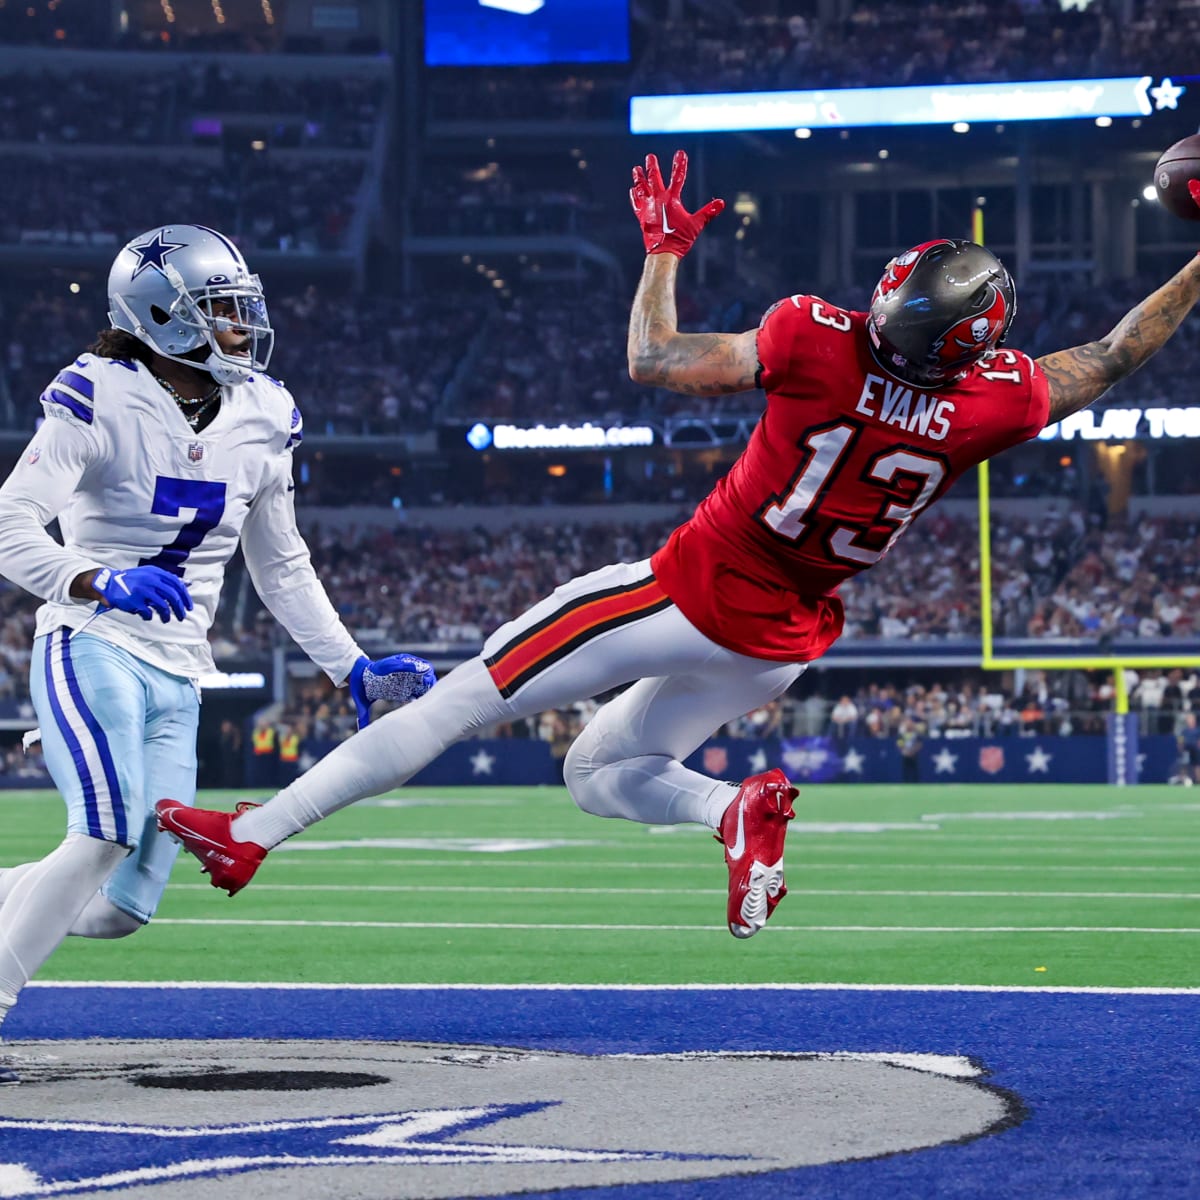 NFL TV ratings roar back to a 'golden zone' thanks to Cowboys, parity and  year-round drama